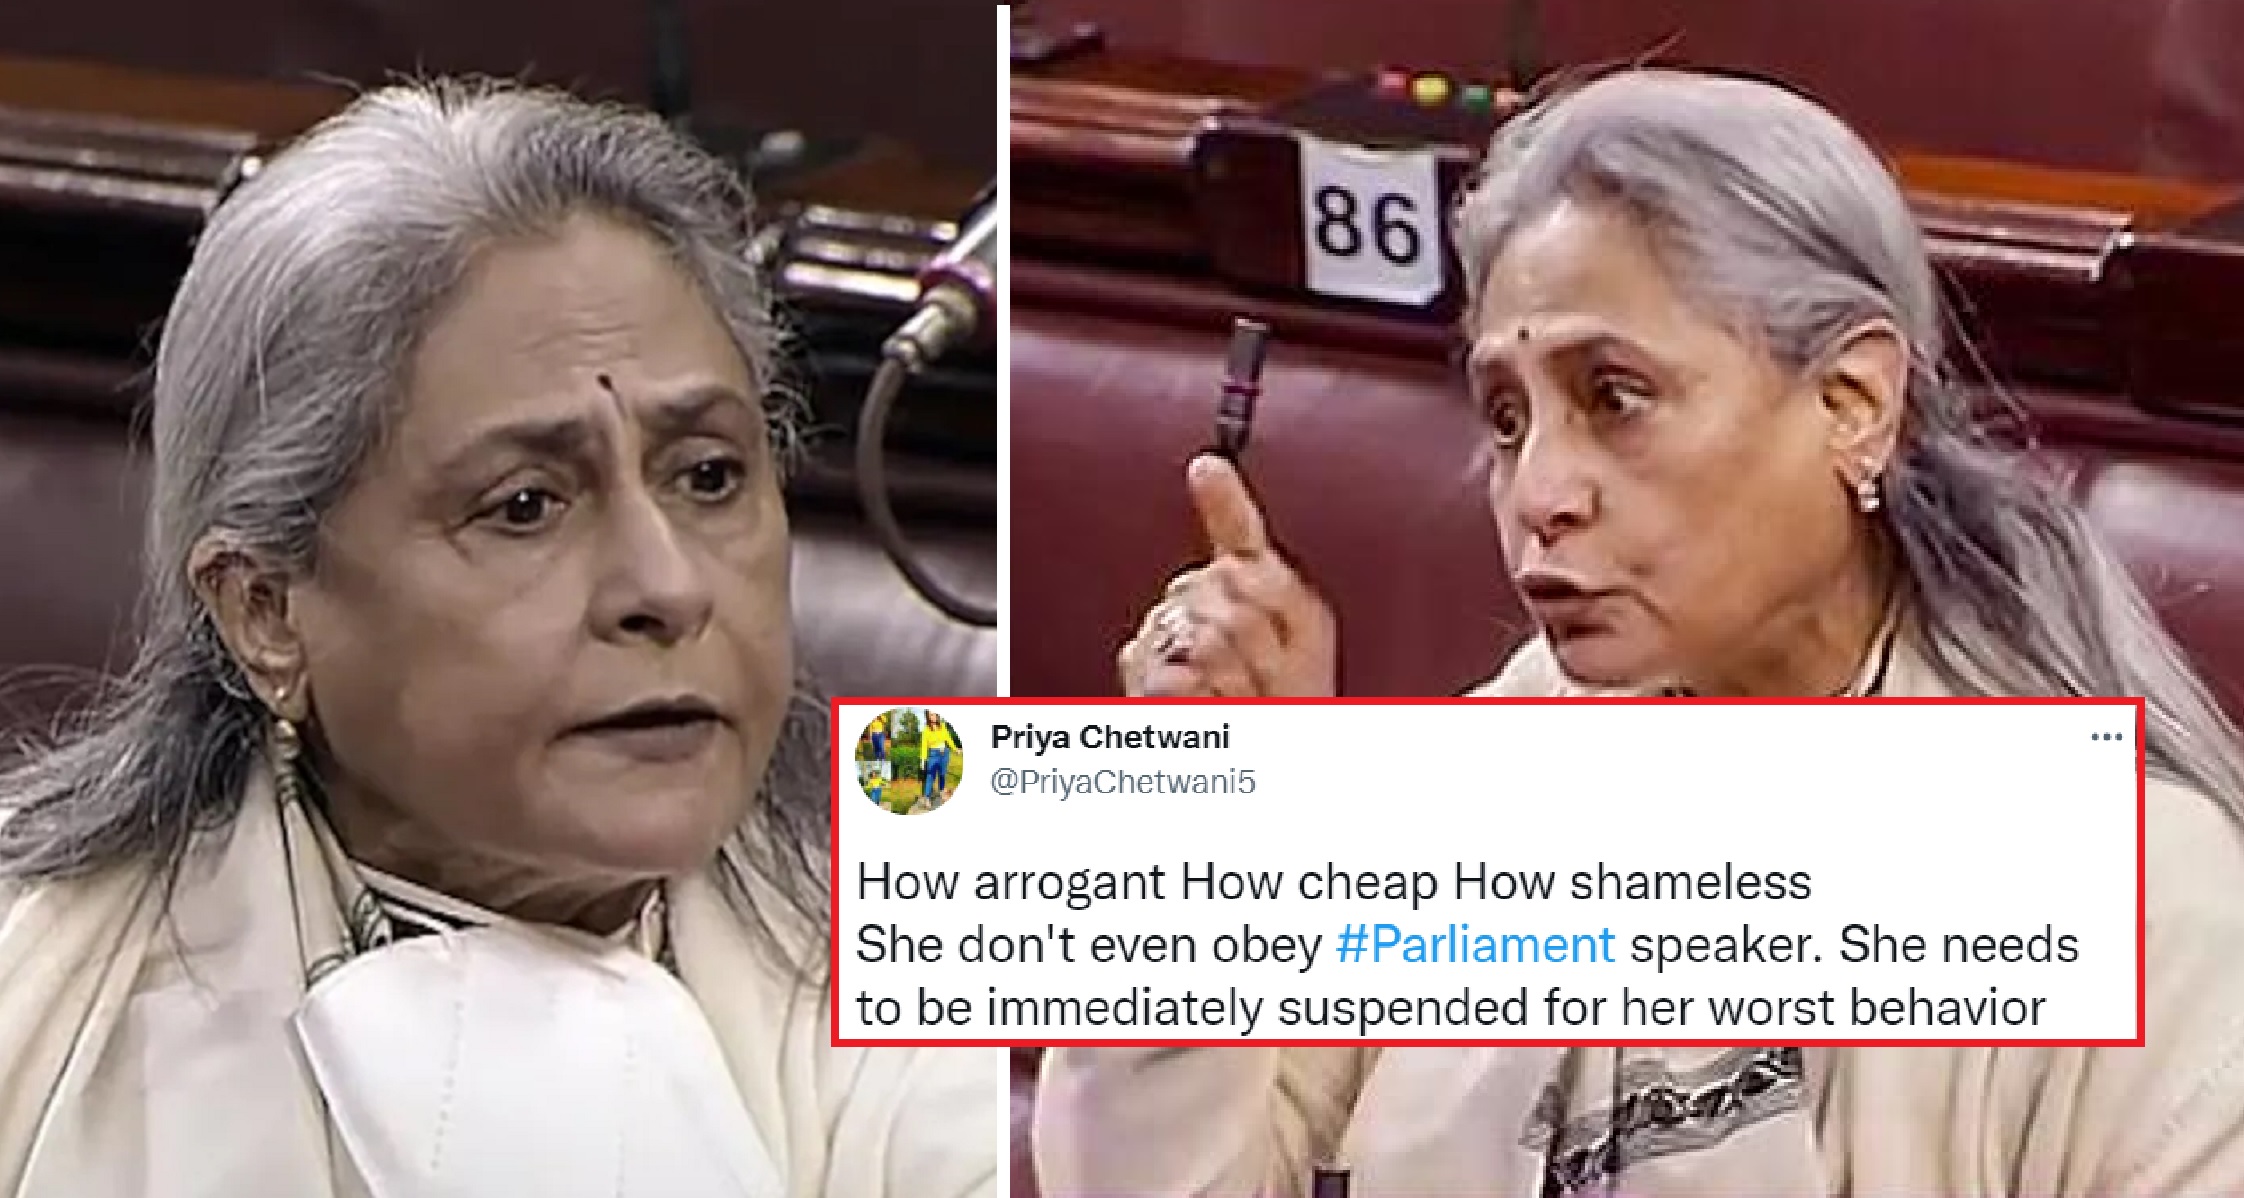 Jaya Bachchan Receives Backlash For Her ‘I Curse You’ Outburst In Rajya Sabha, Here Are Some Twitter Reactions